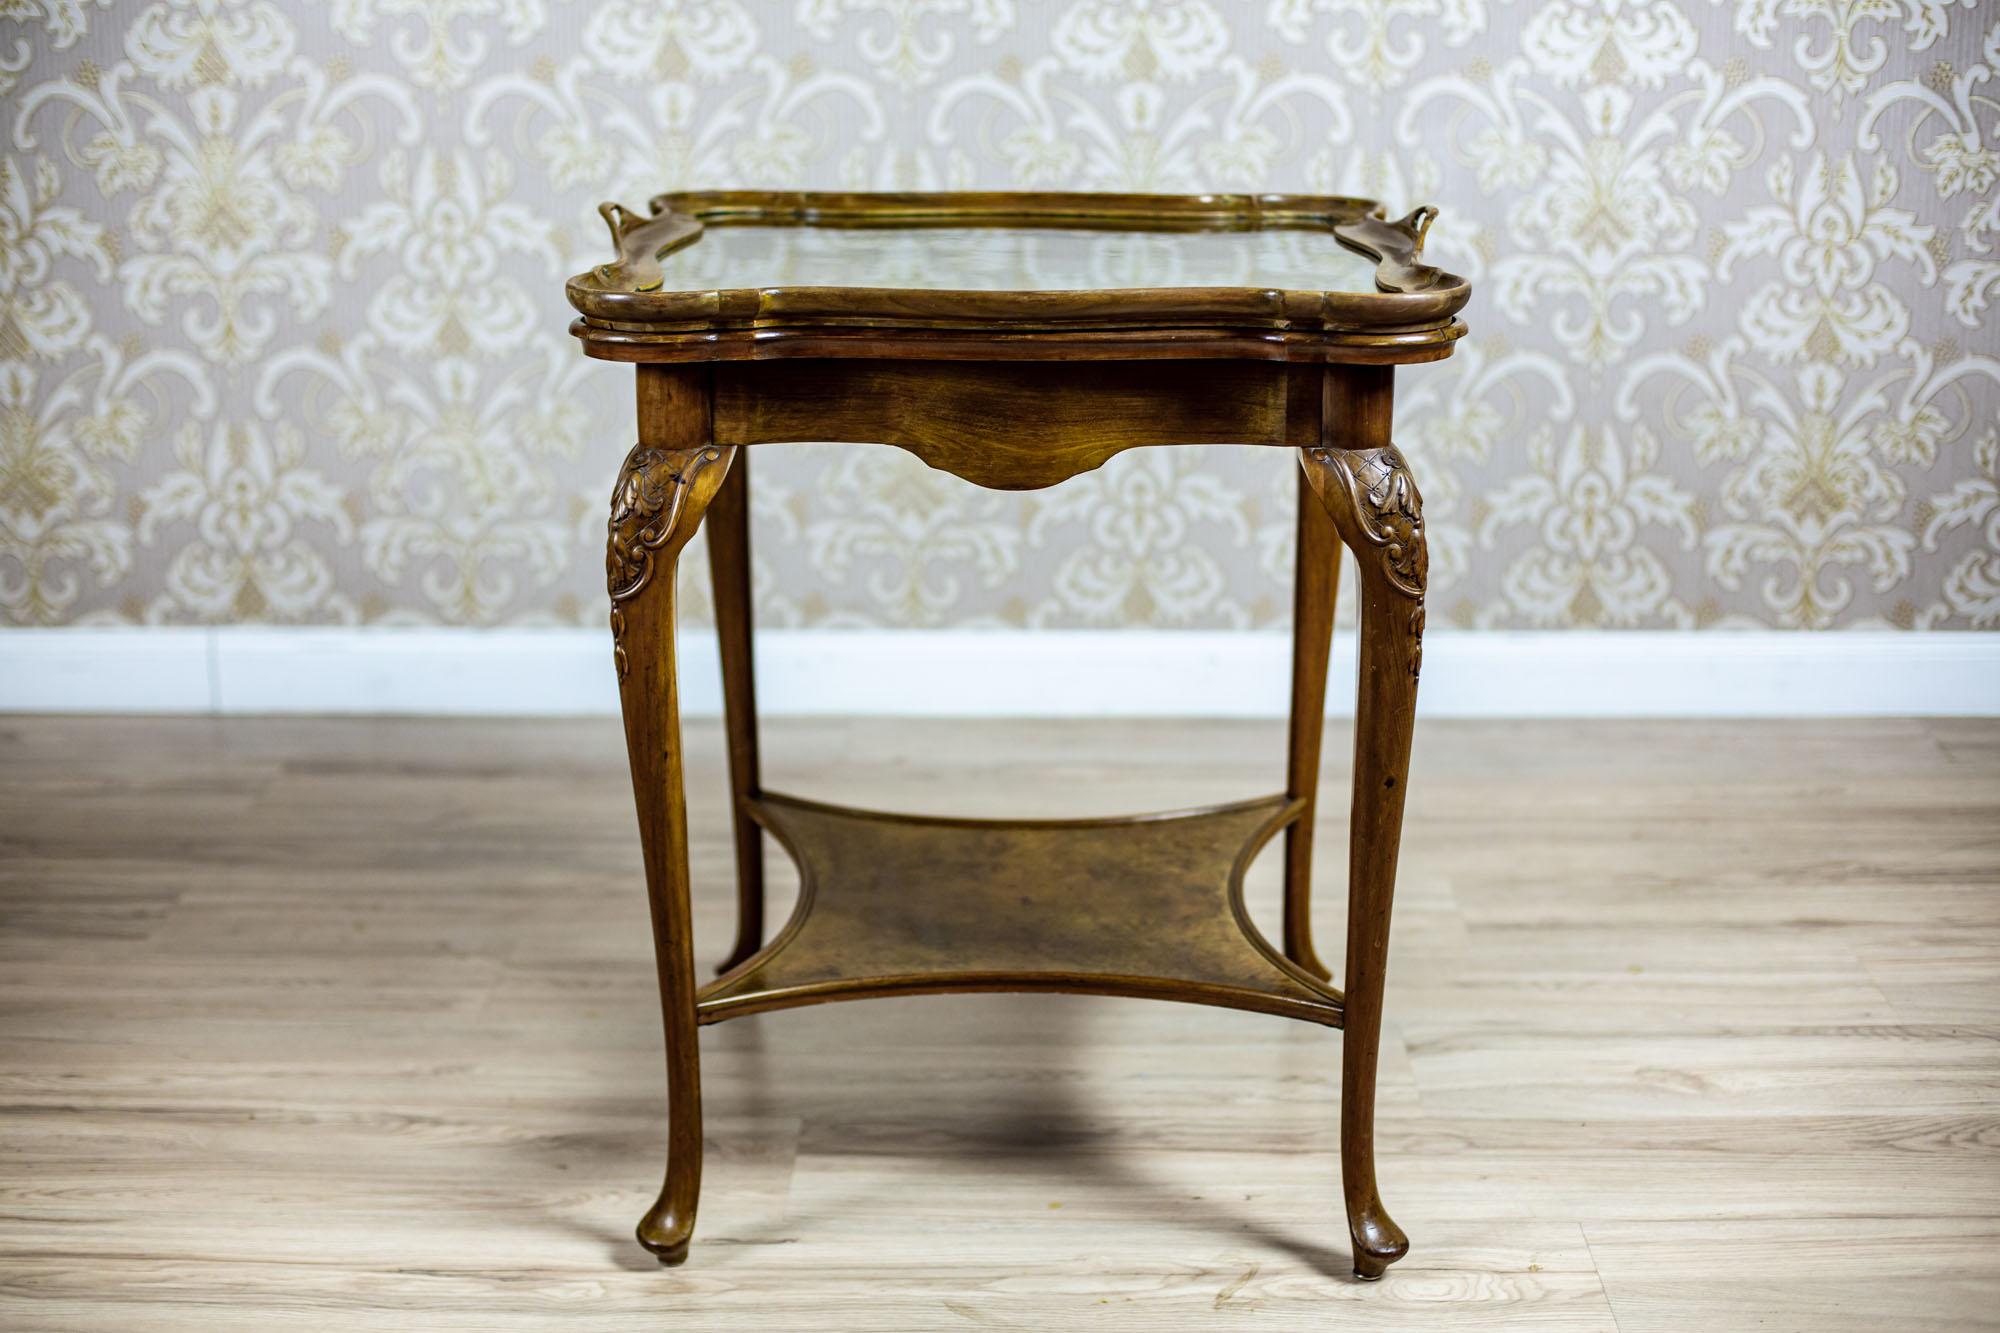 We present you a square coffee table with a removable tray.
All is dated after the year 1945.
The table top is supported on bent legs with protruding knees, which are covered with carved patterns.
Furthermore, the legs are connected at the bottom